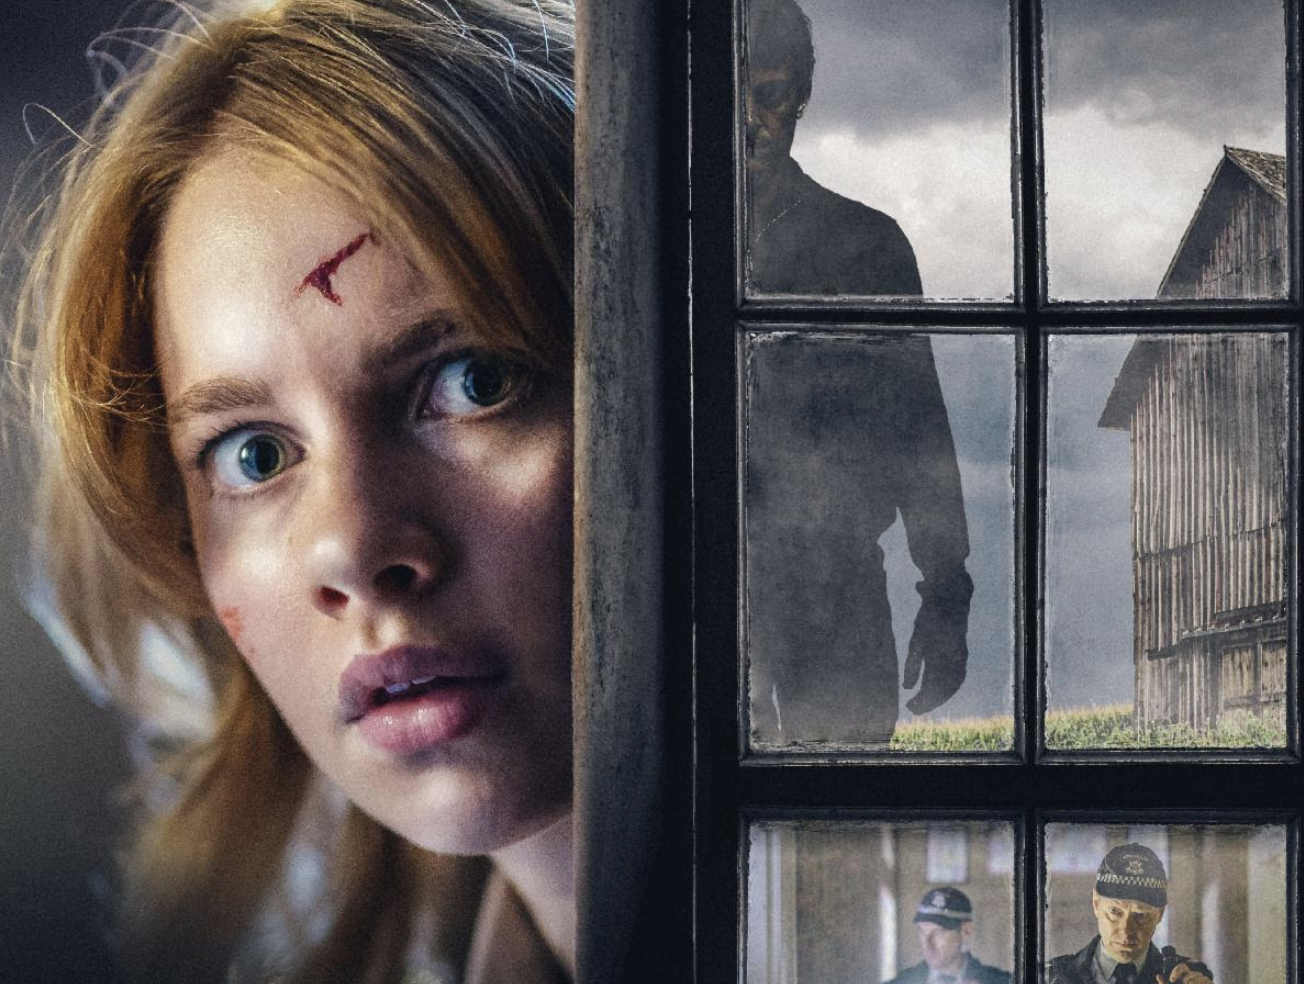 Watch Trailer for Mark Hartley’s ‘Girl at the Window’ – Available Now